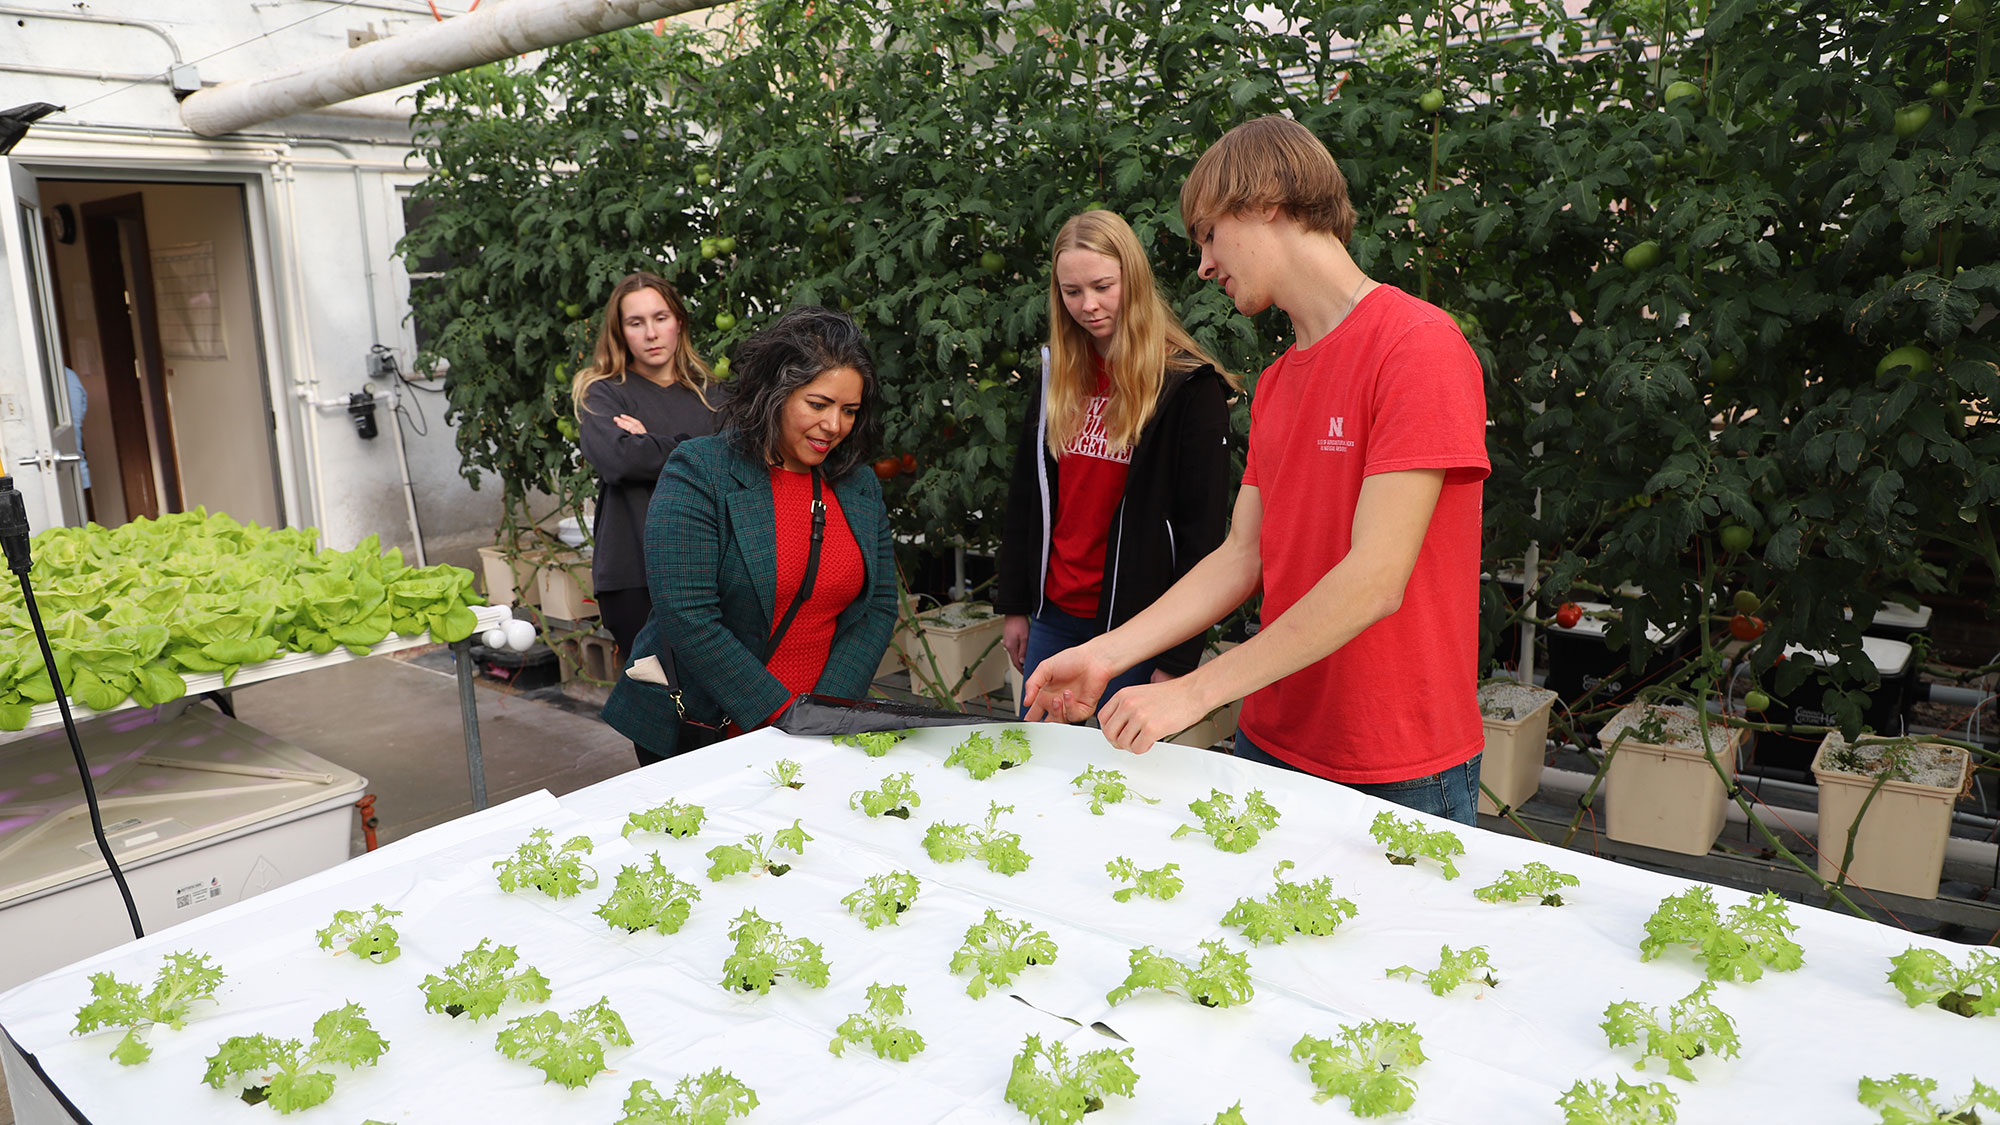 Grace Ruff (left), a senior plant and landscape systems major, and Nicole Svanda (middle), an agribusiness major, look on as William Anderson (right) demonstrates his hydroponic system to Jazmin Albarran of Seed Your Future during an open house Nov. 17.